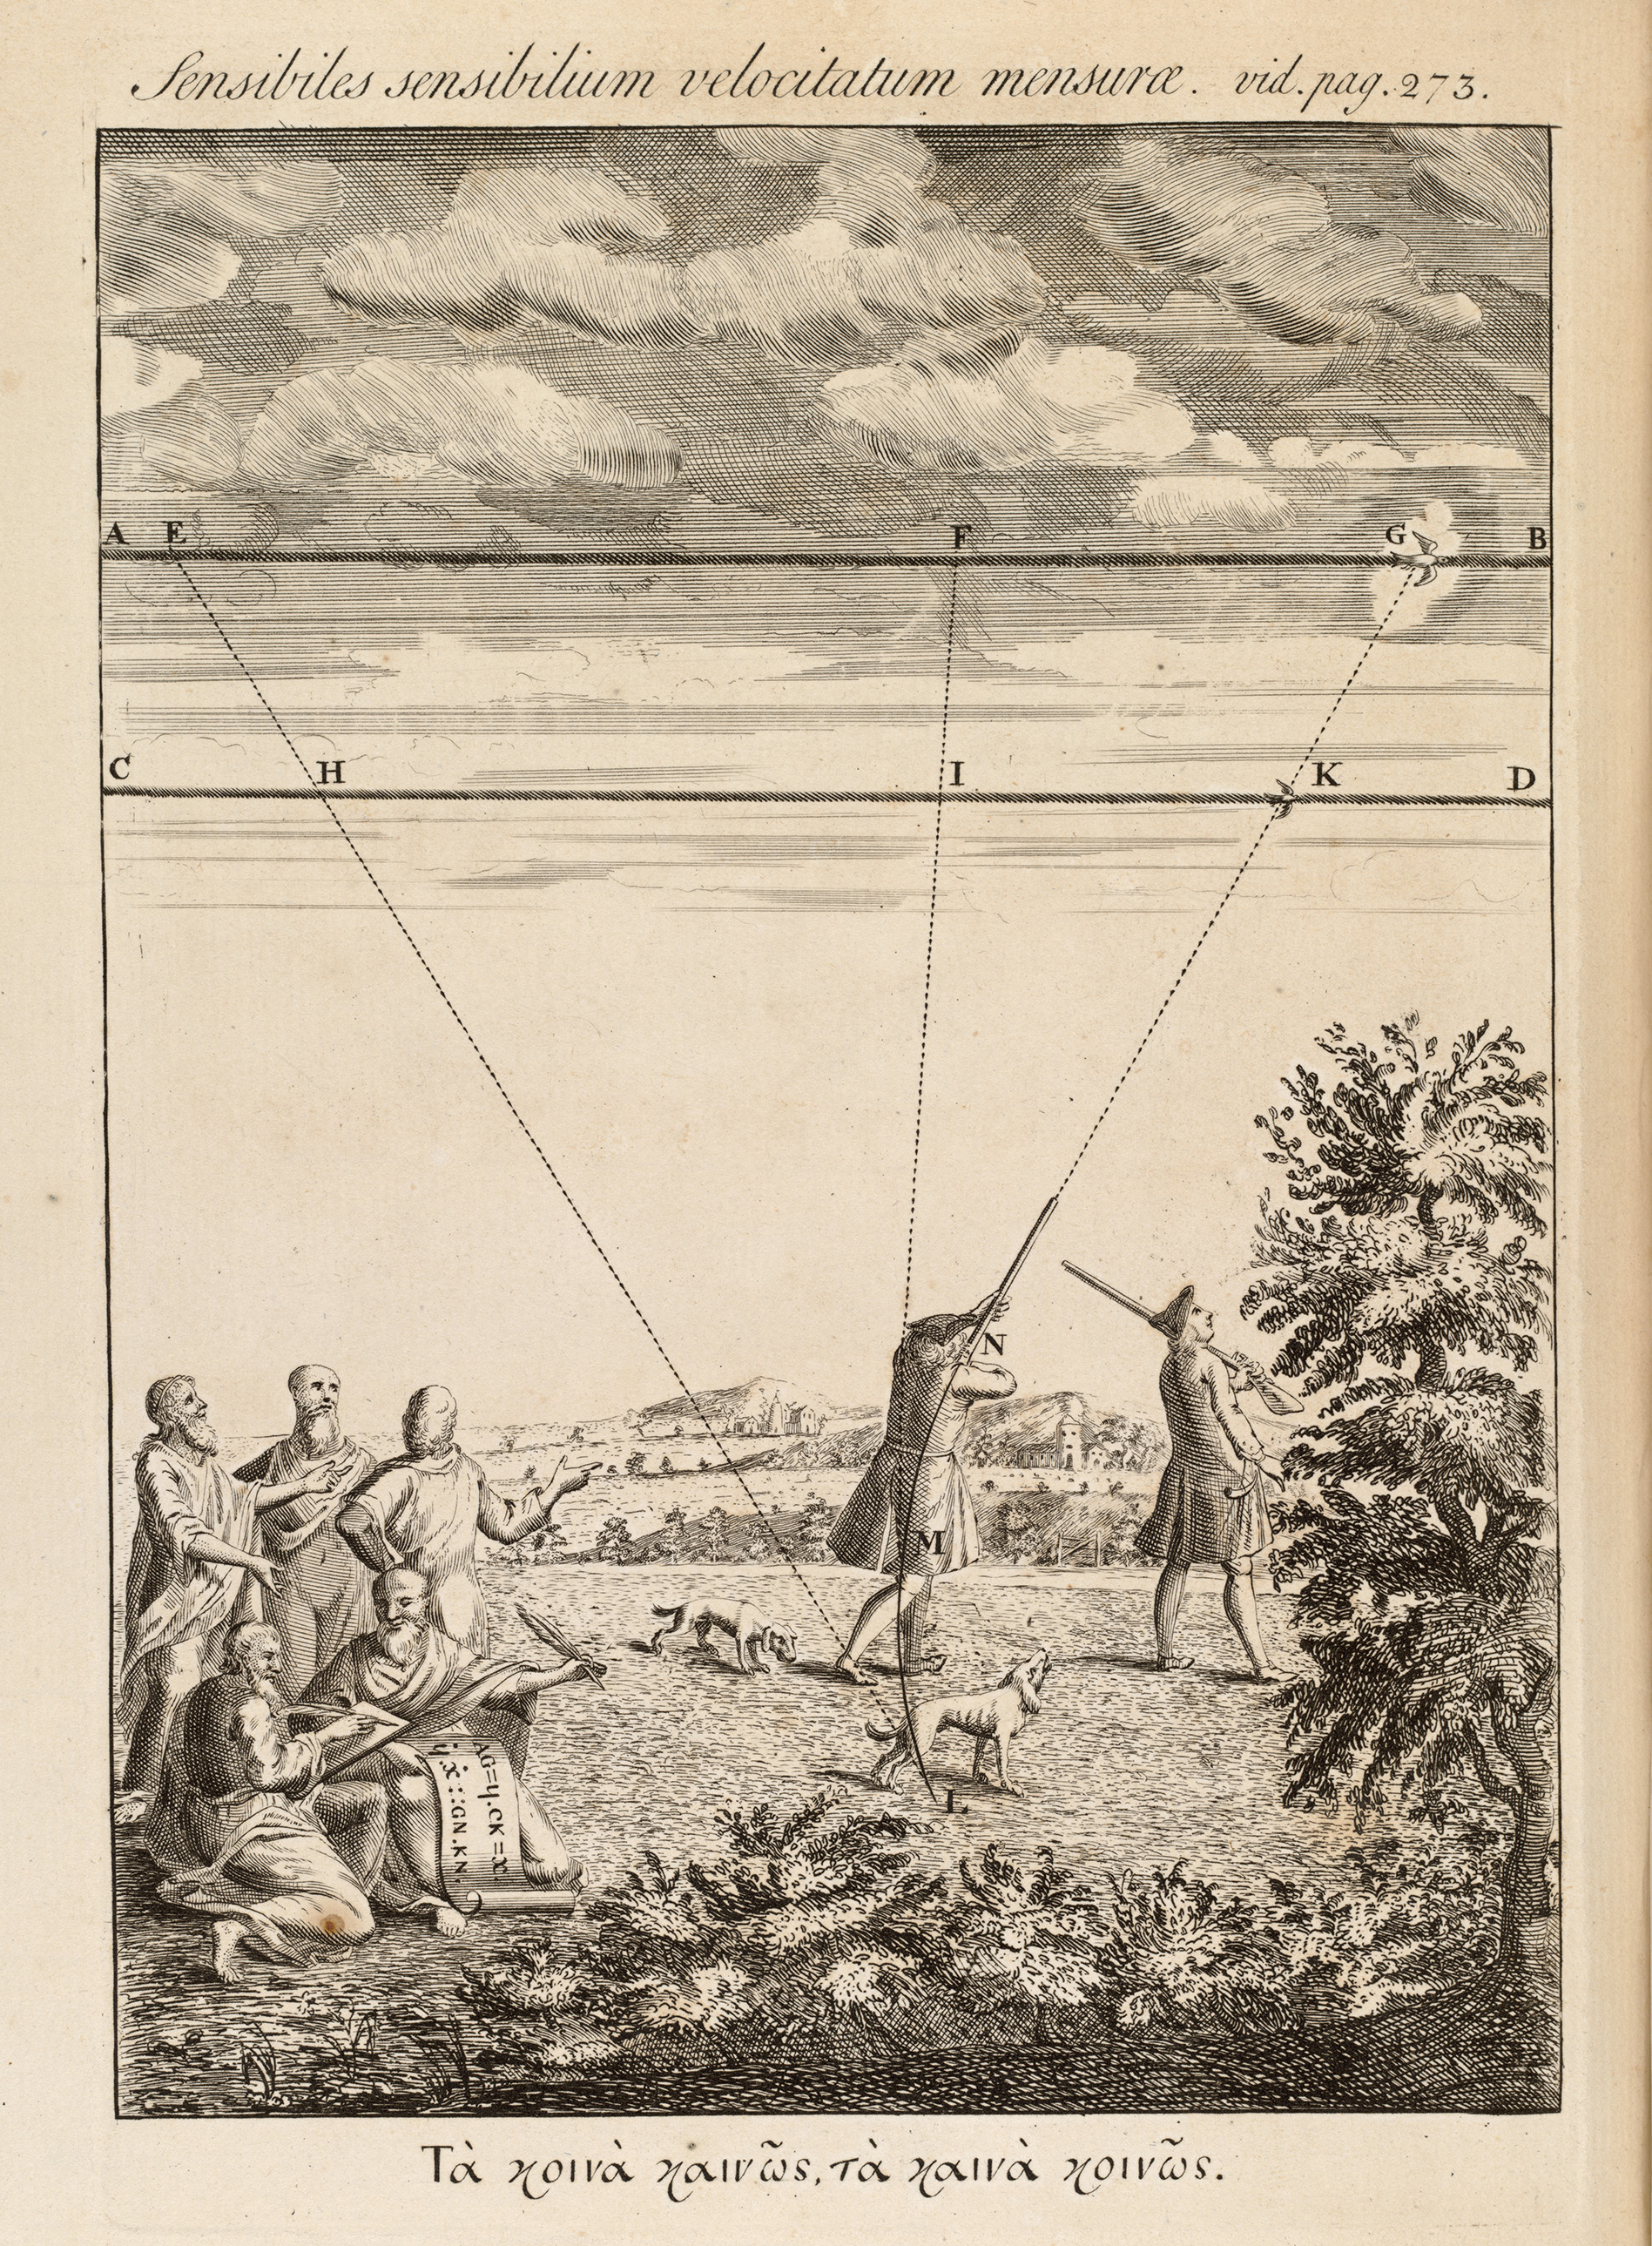 BT3.182.6, frontispiece, Isaac Newton’s The method of fluxions and infinite series (1736)